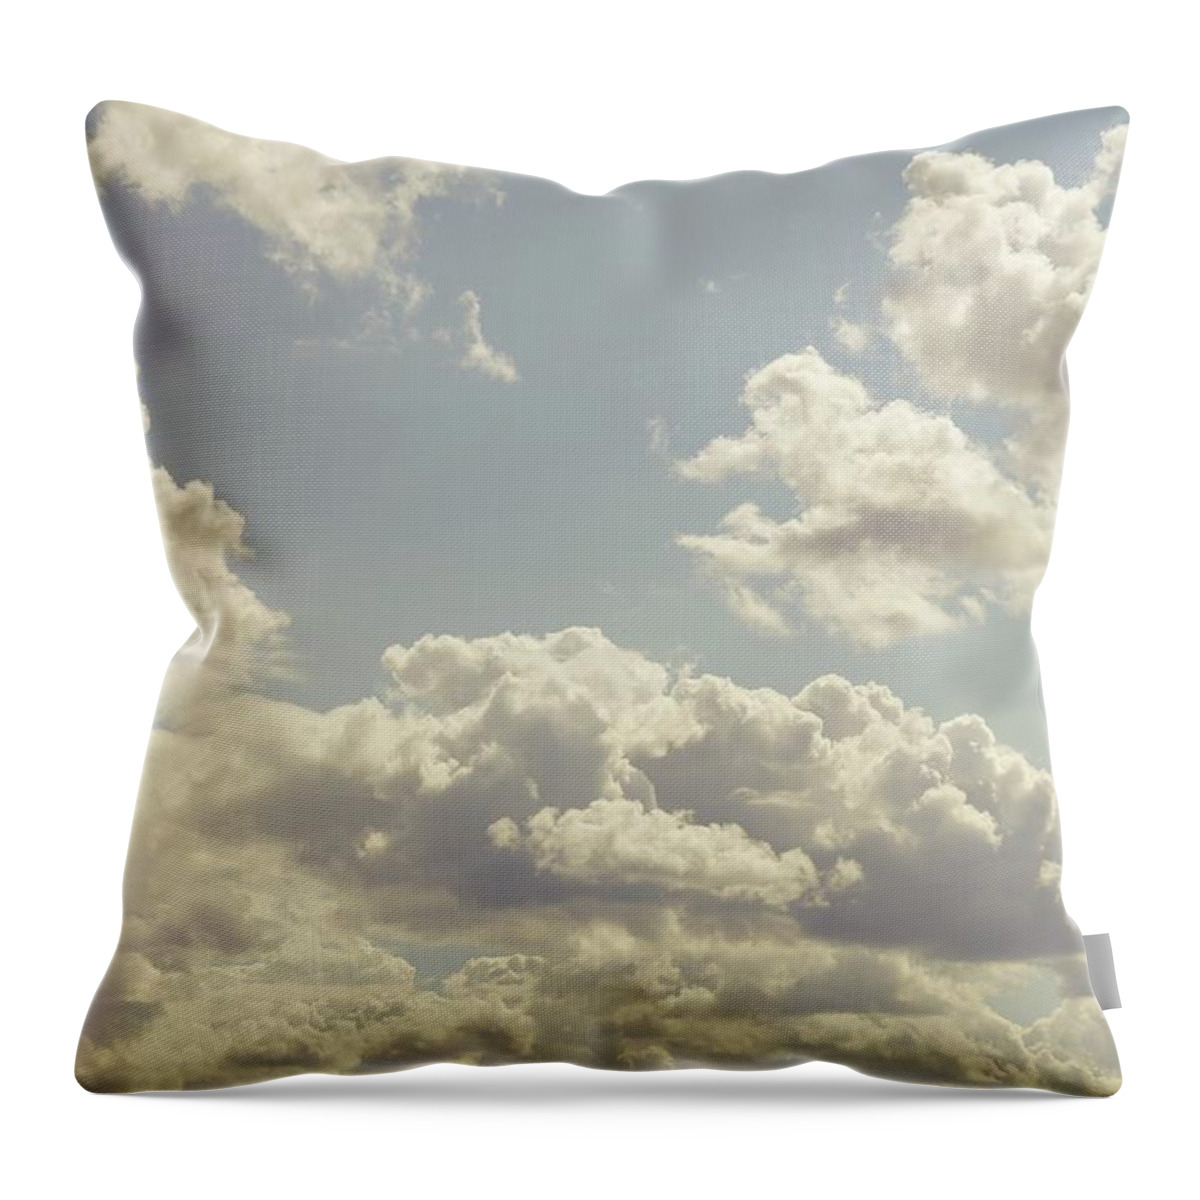 Tranquility Throw Pillow featuring the photograph Cloudy Skies by Denise Balyoz Photography